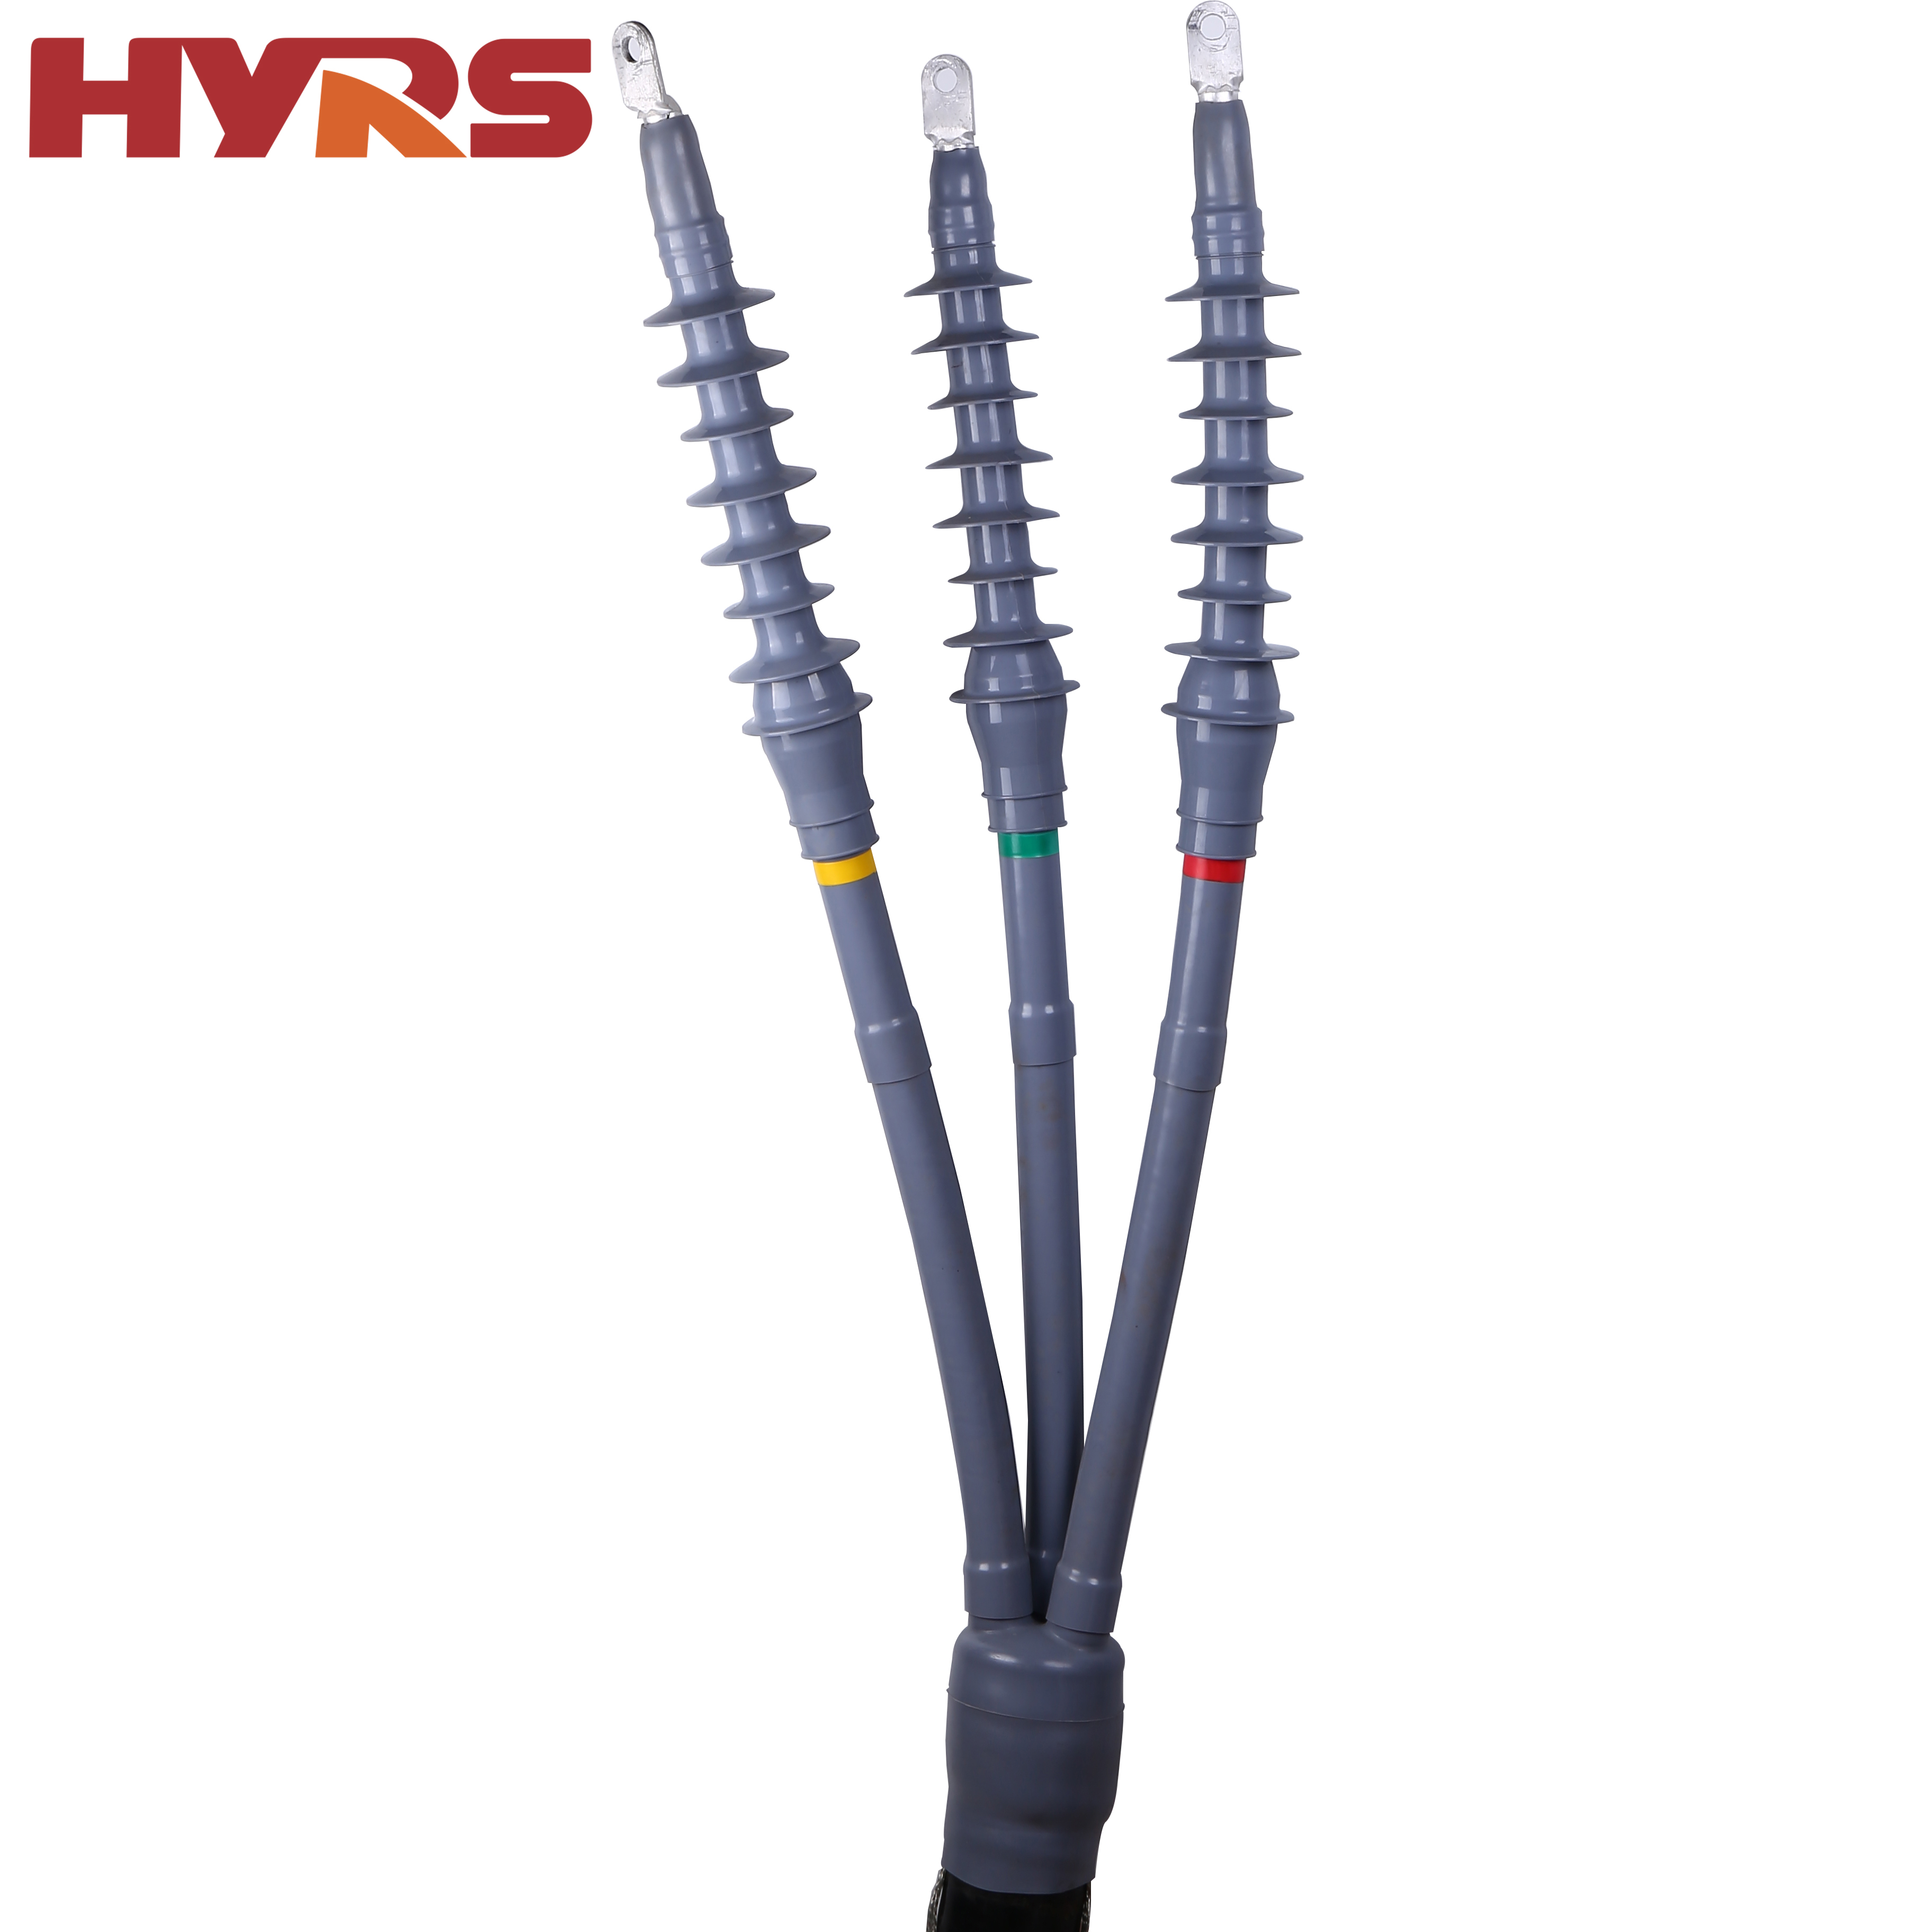 Advantages of fireproof cable and cable accessories